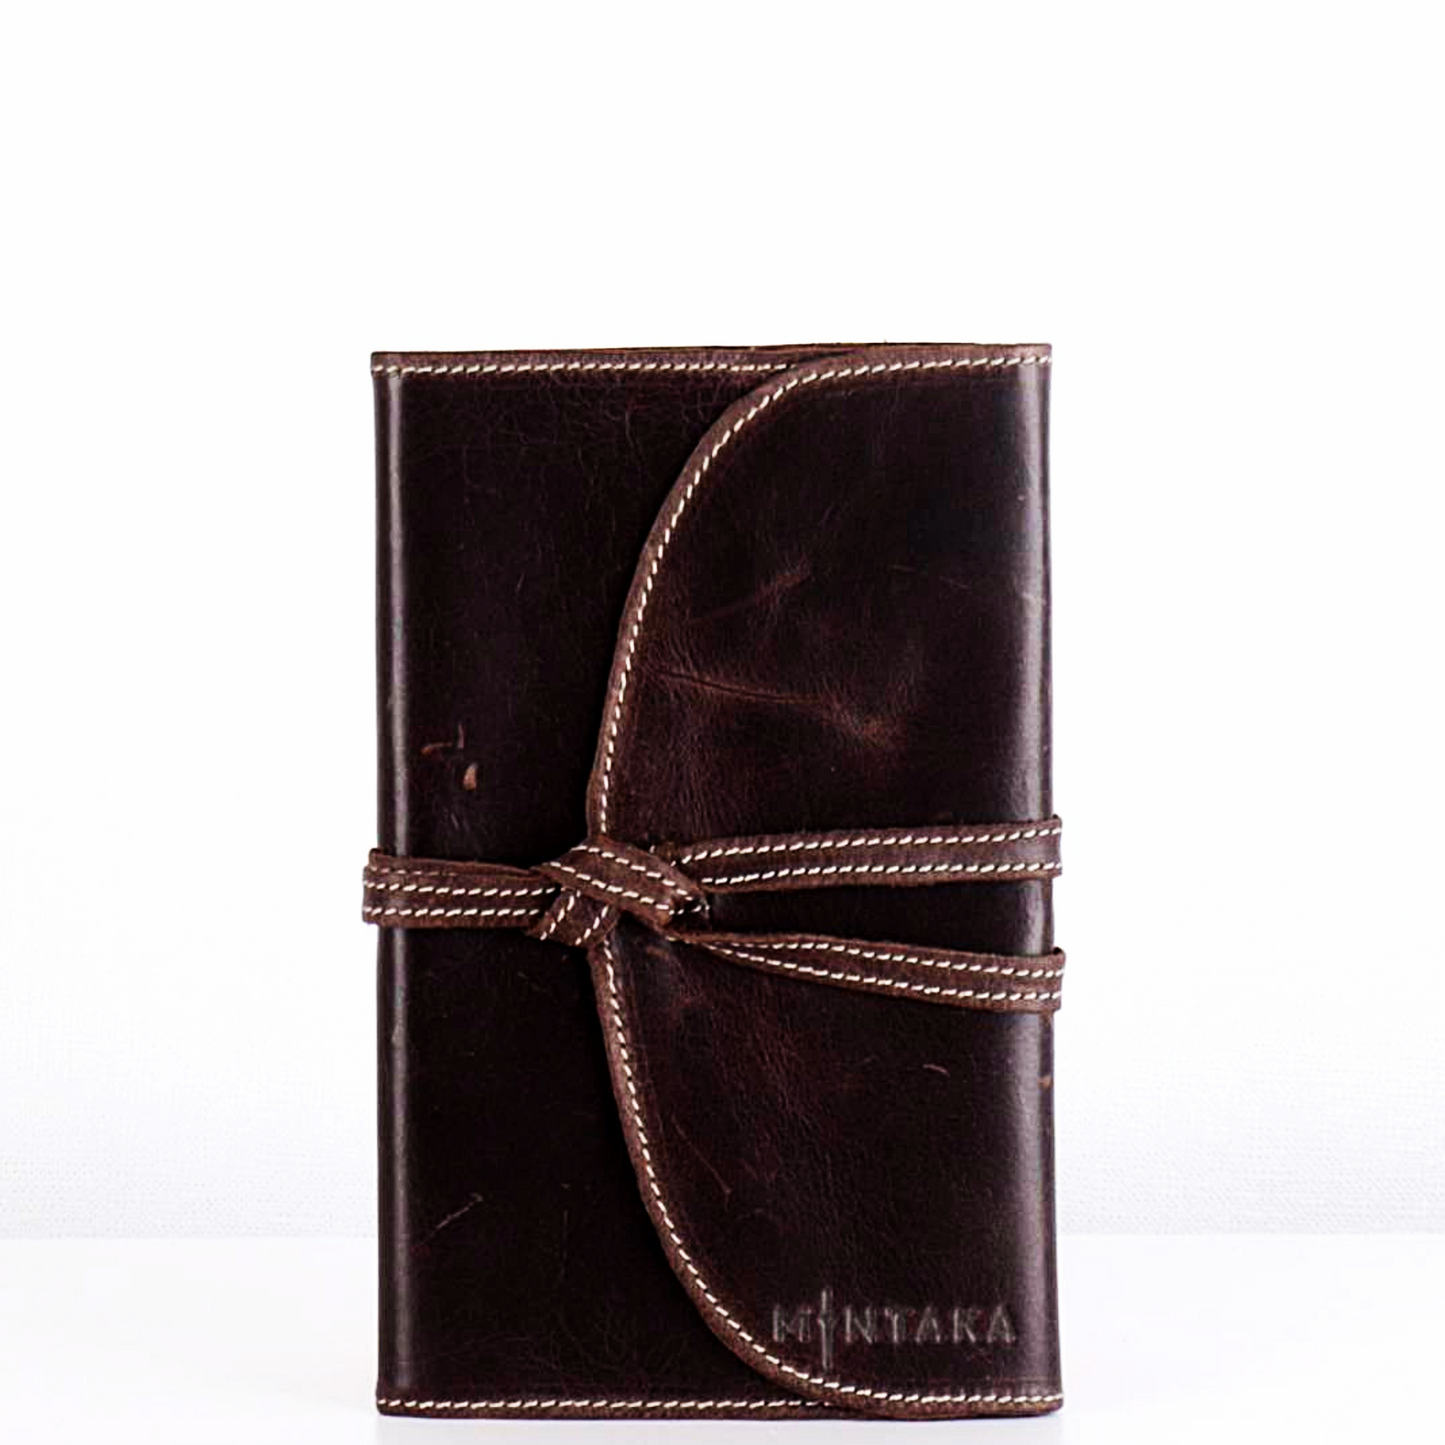 A5 Wrap Leather Journal